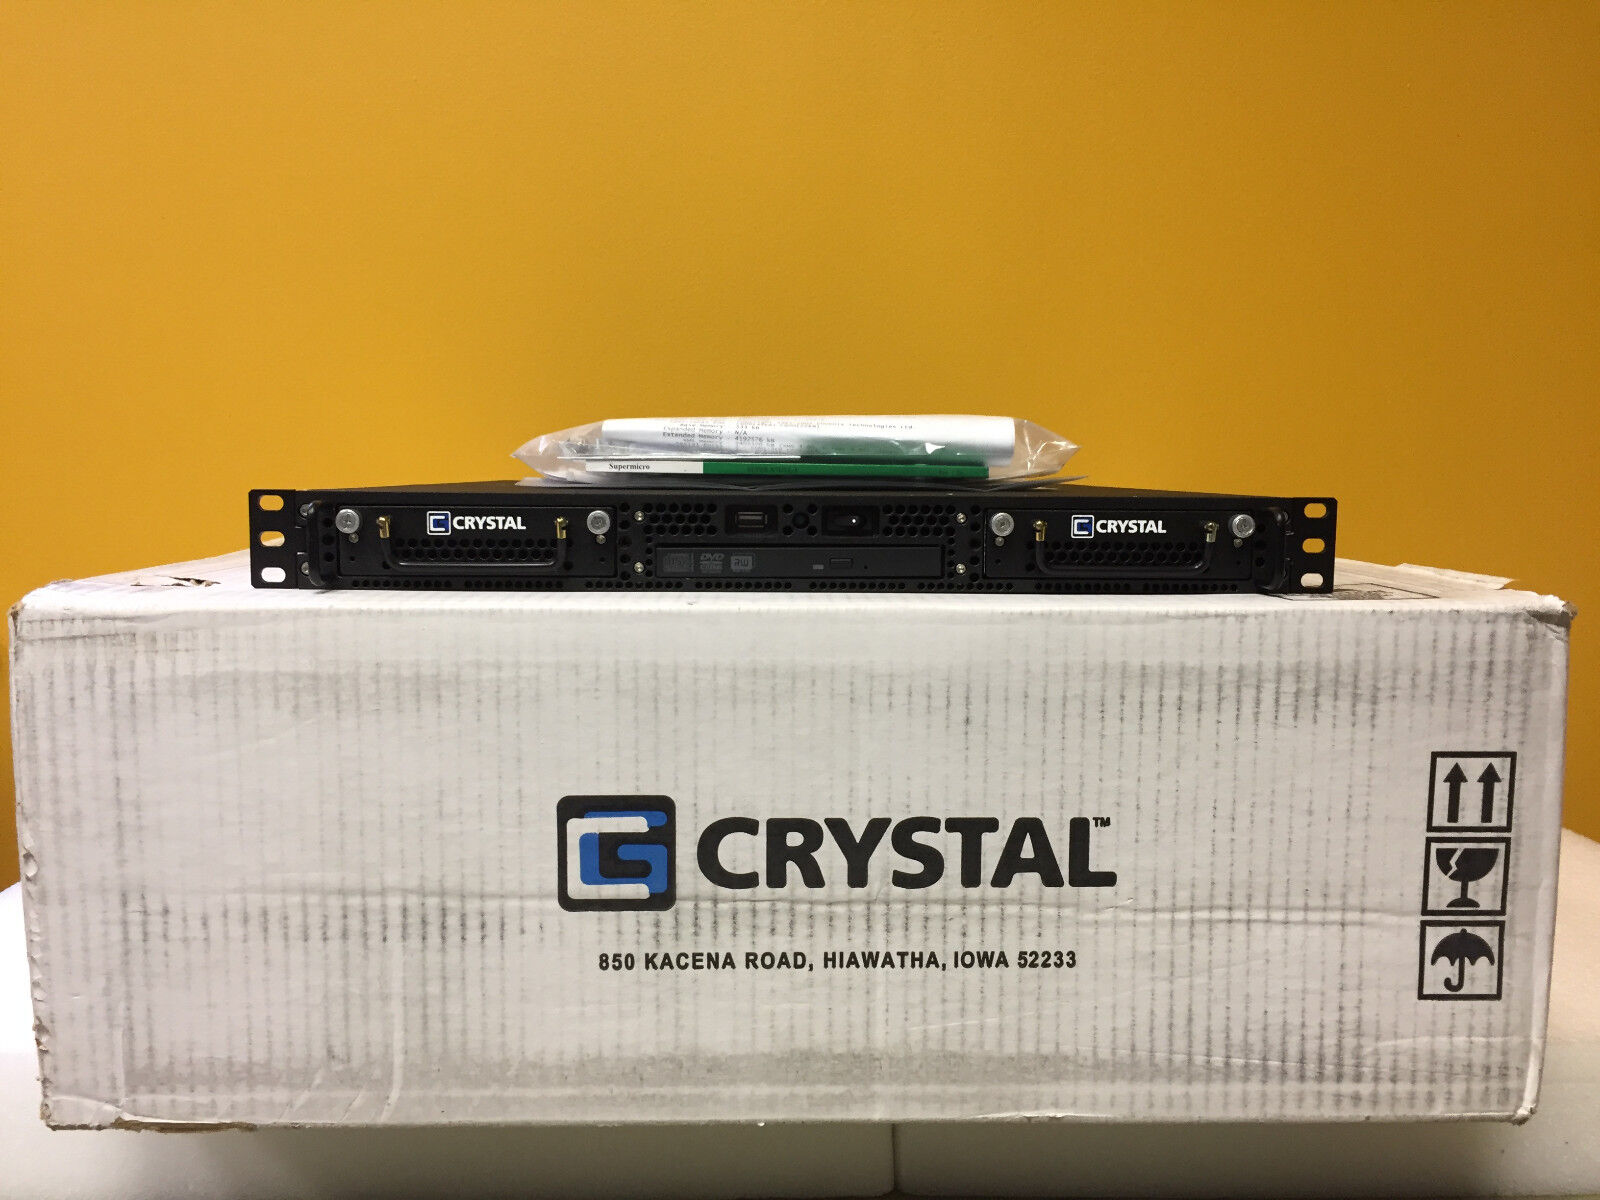 Crystal RS112 Intel Xeon E5440 2.83 GHz, 4 GB RAM, Rugged Server. New + Accy's